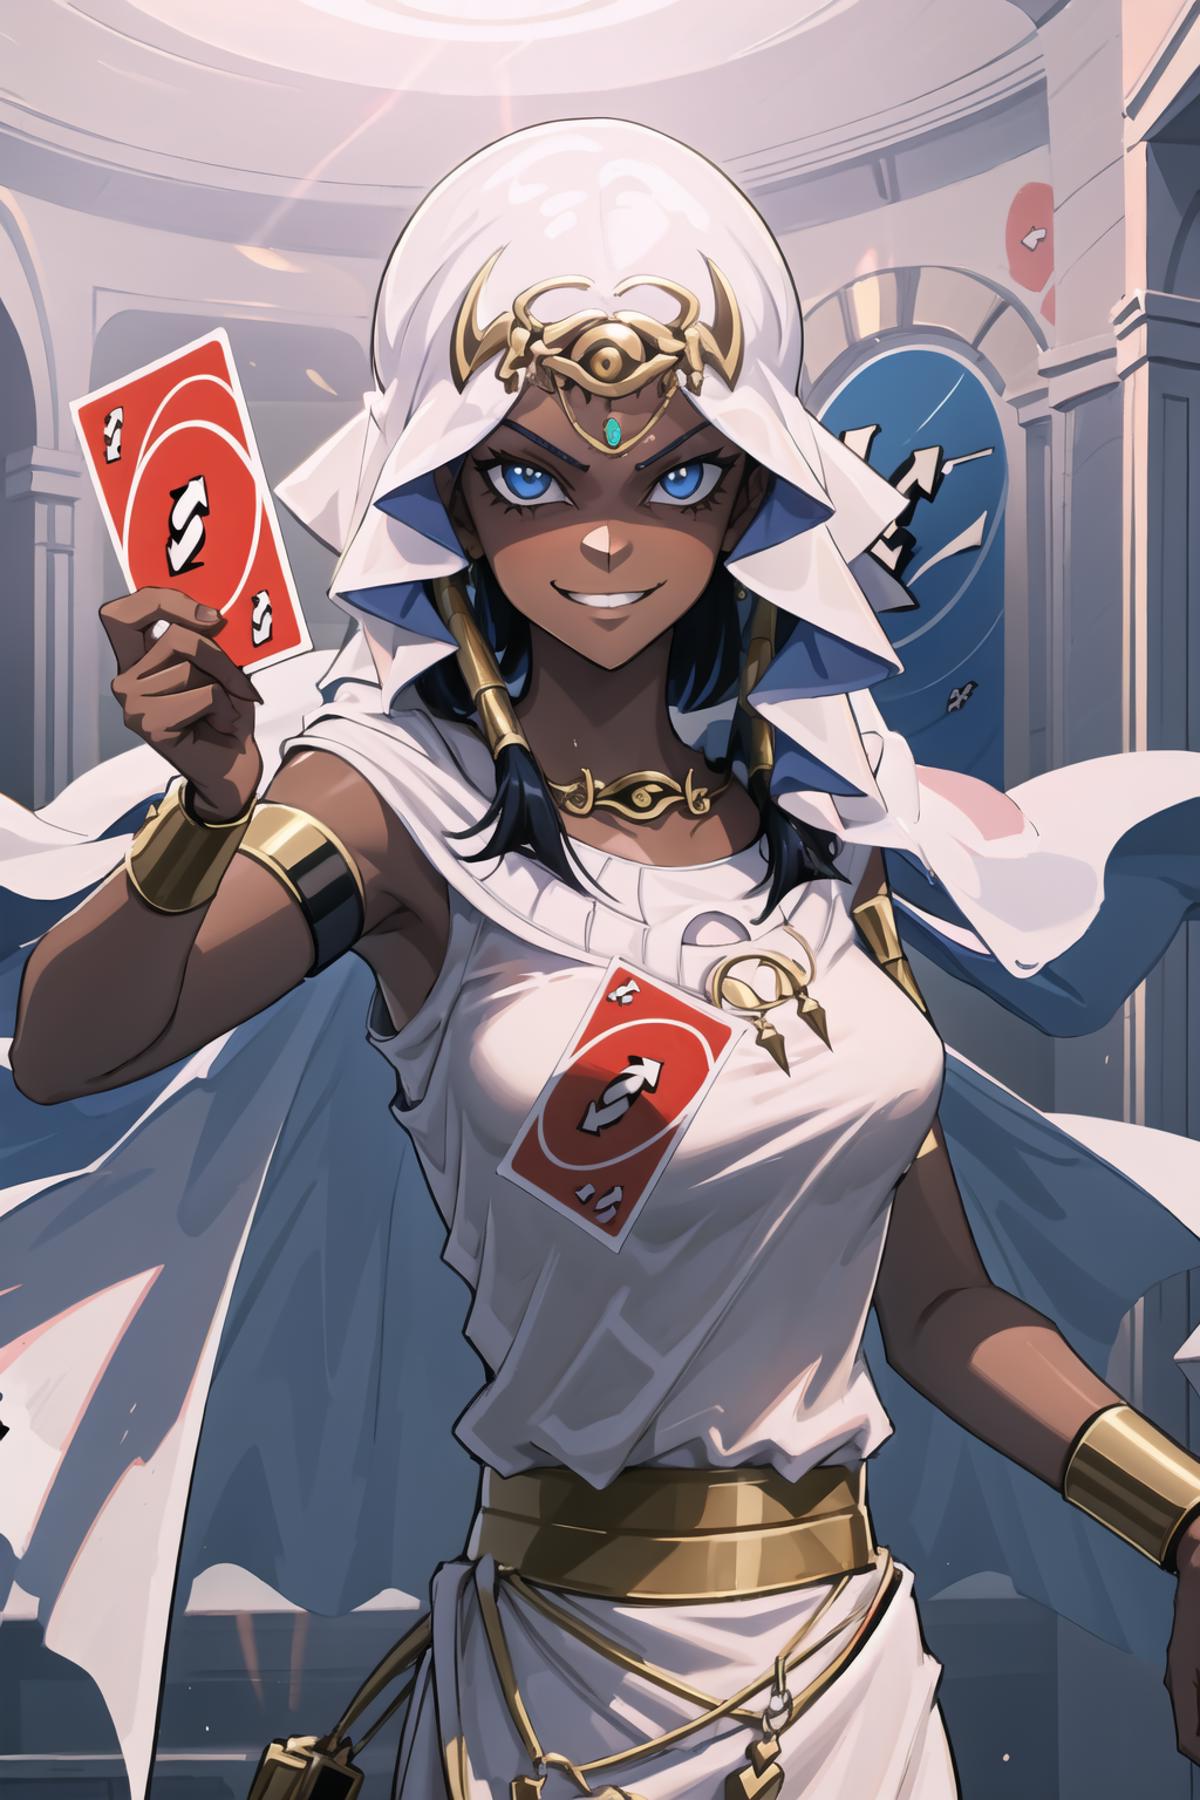 An Egyptian woman wearing a white dress and holding cards.